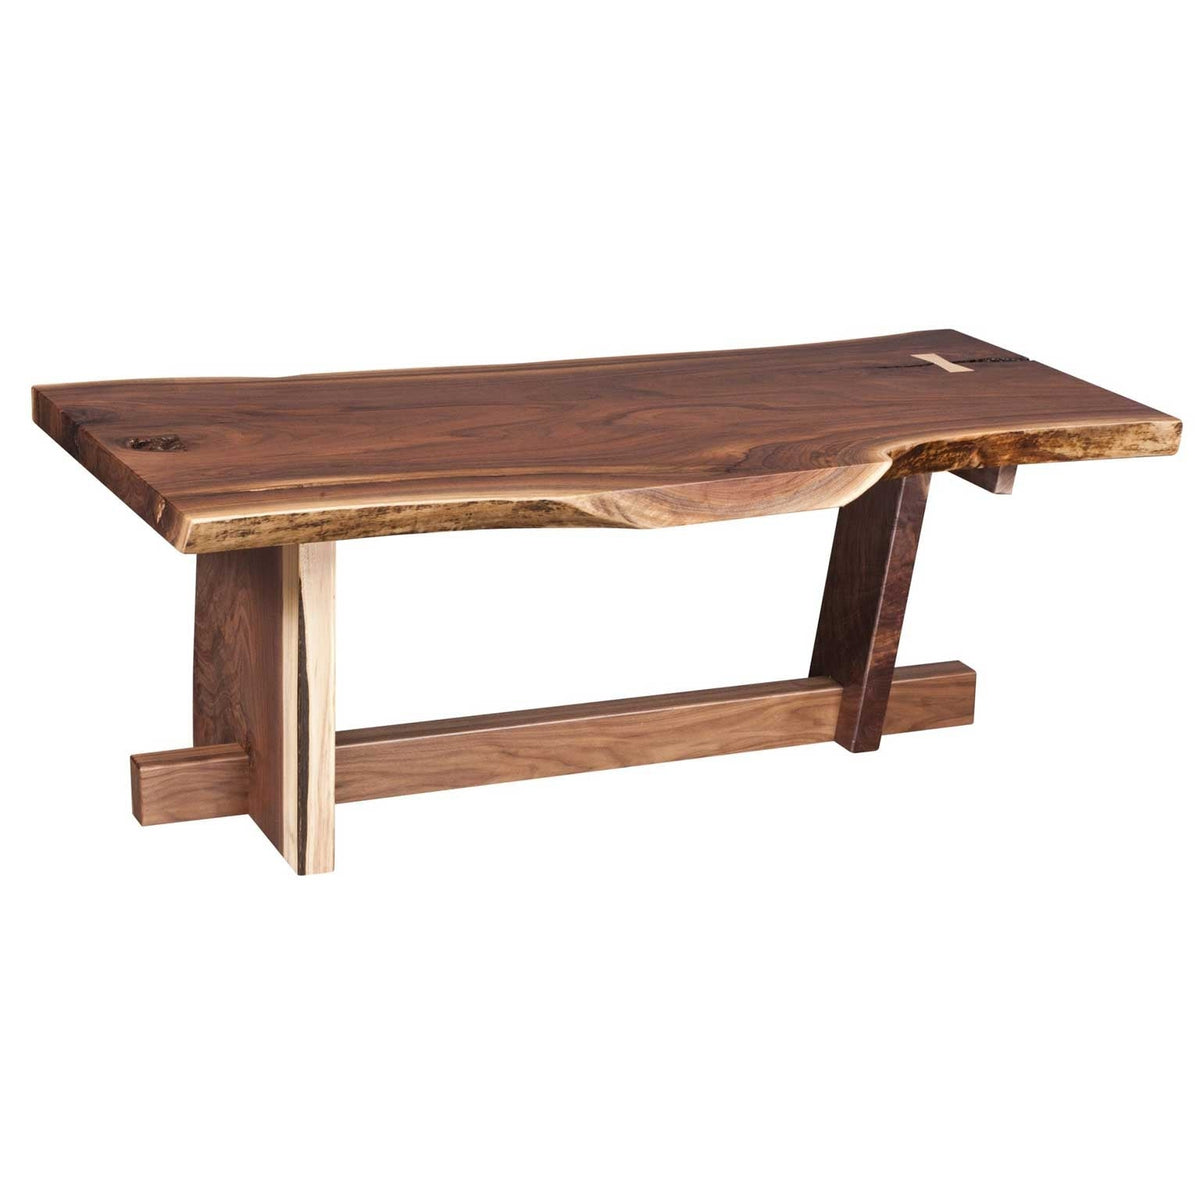 Architectural Live Edge Coffee Table - snyders.furniture